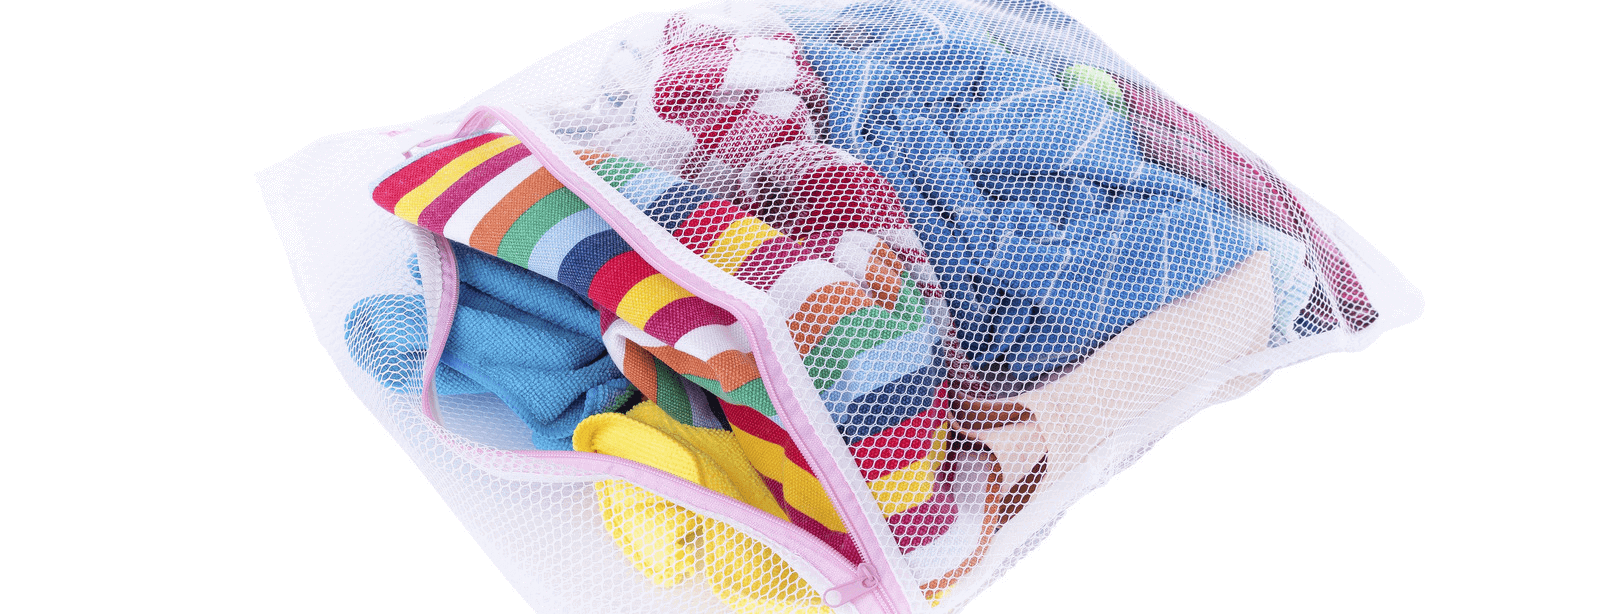 Clothes in a laundry net bag.